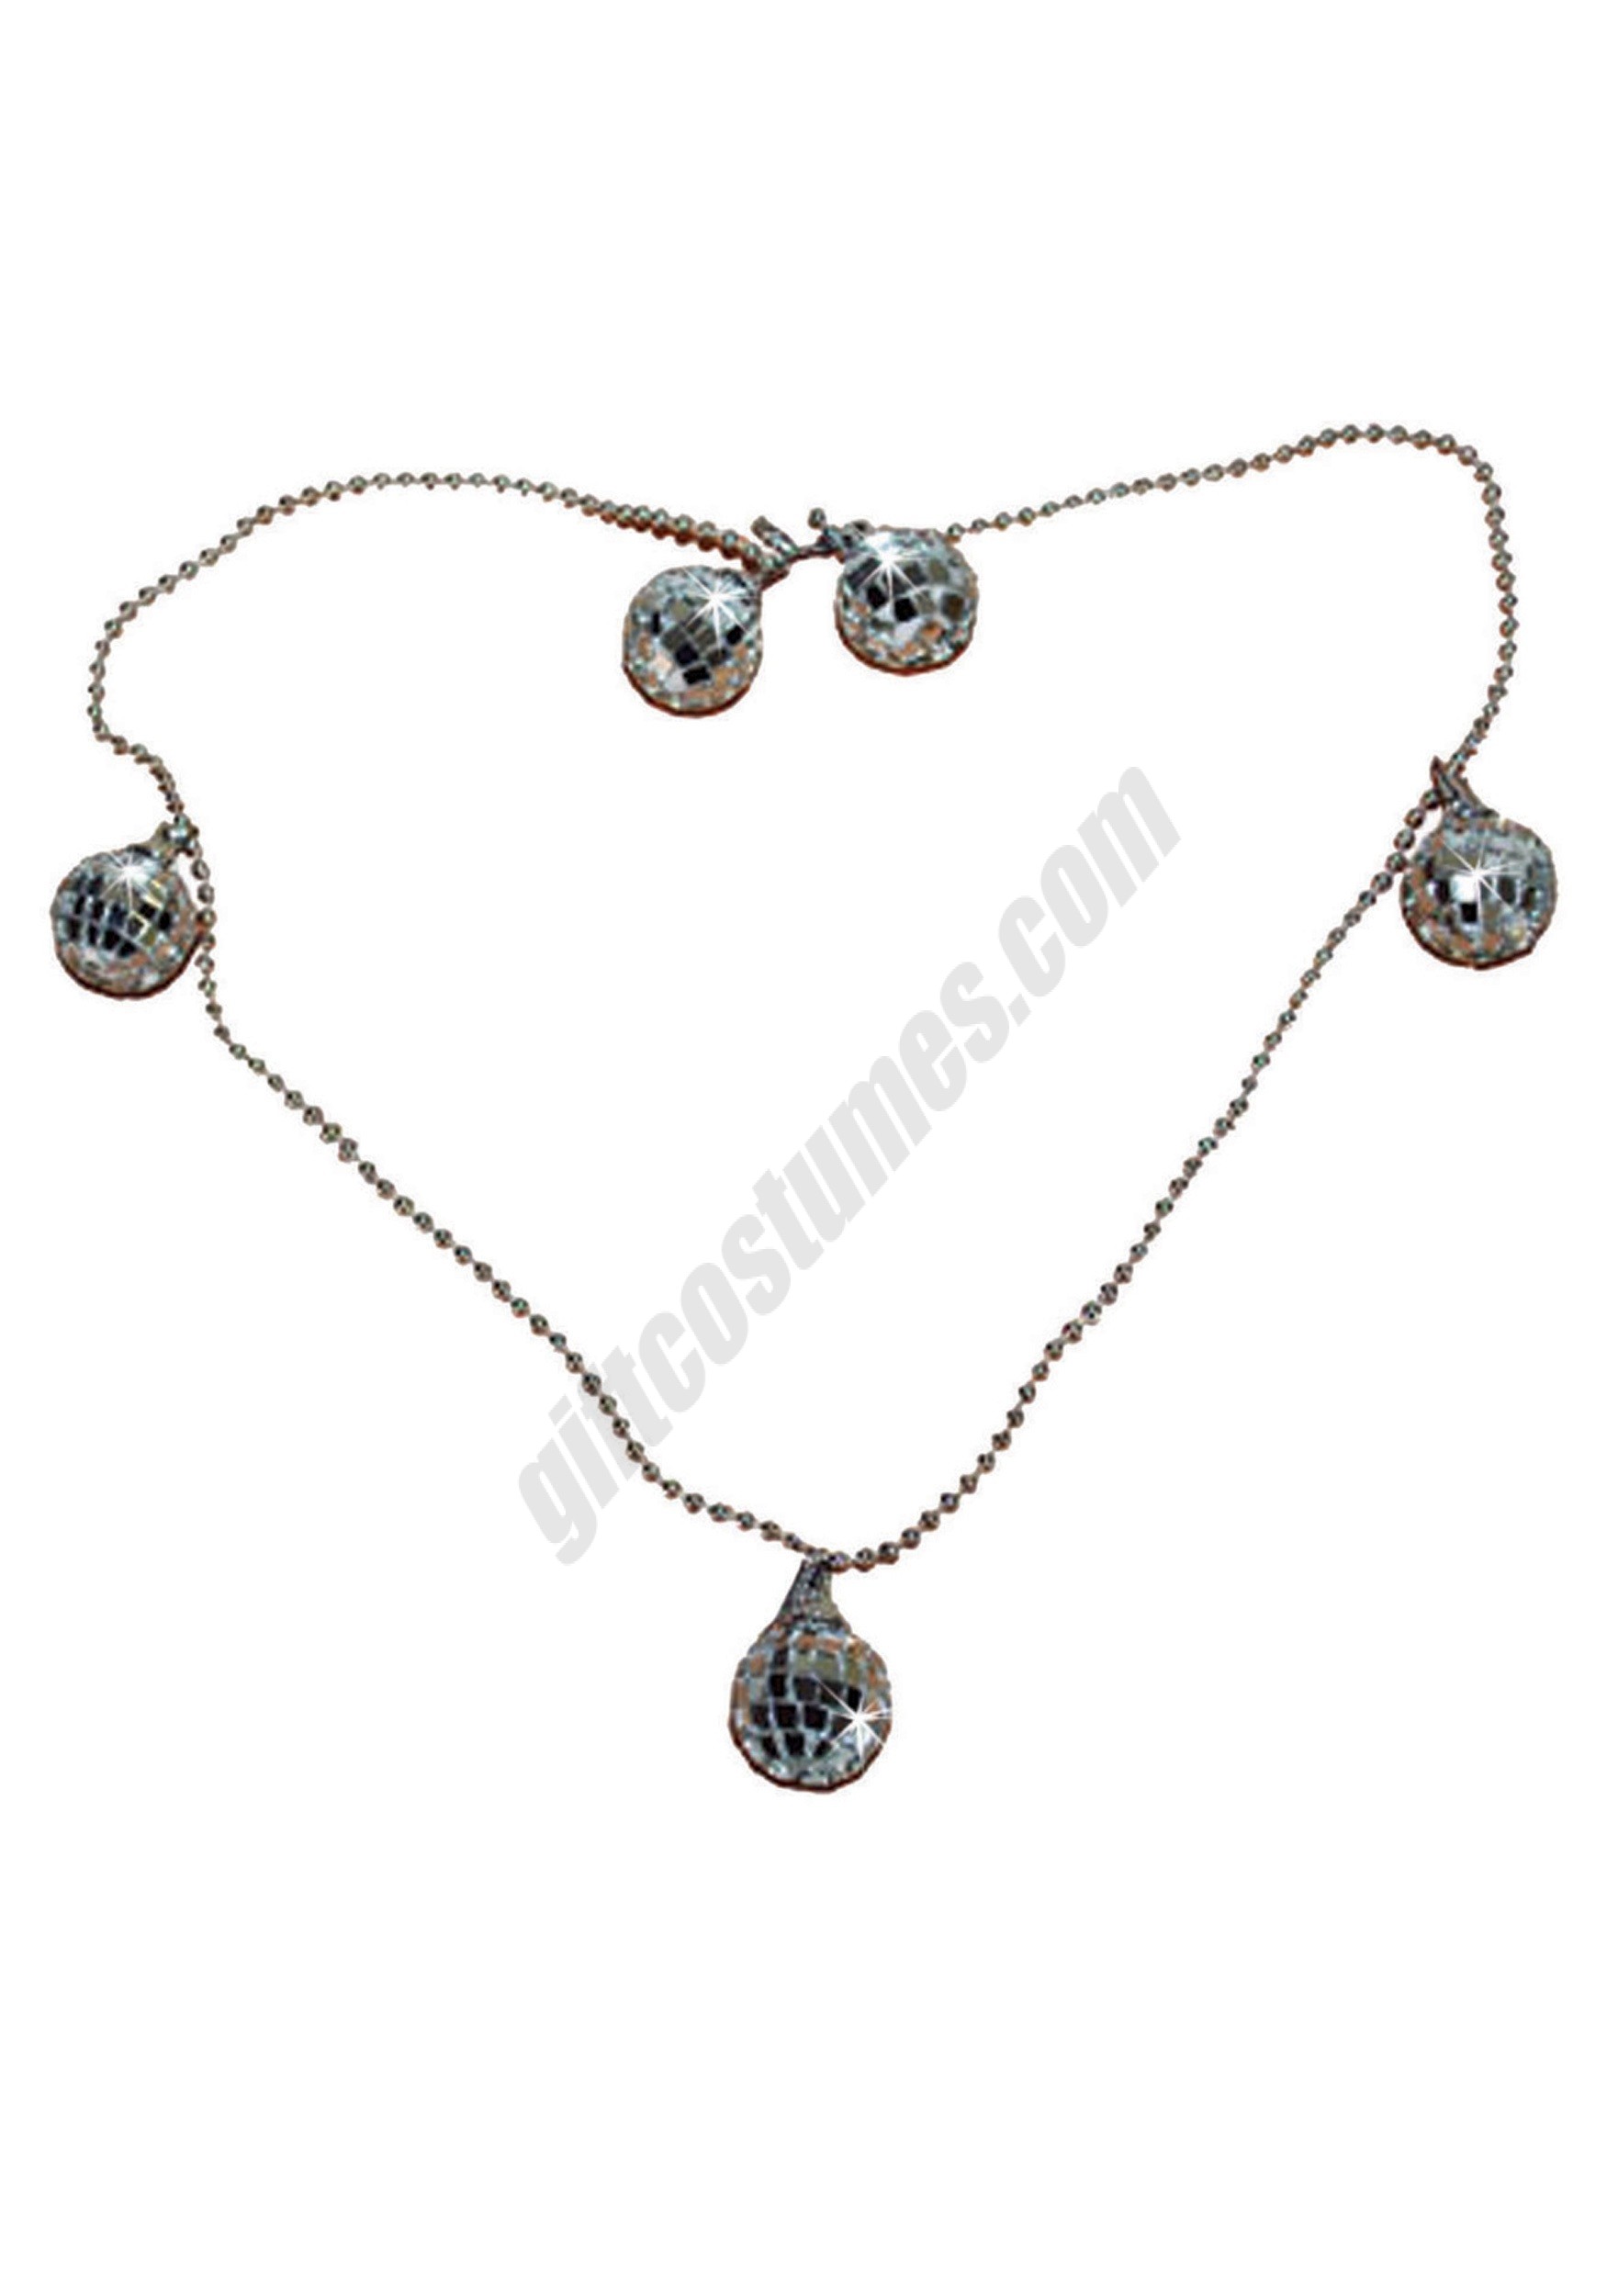 Disco Ball Necklace Promotions - Disco Ball Necklace Promotions